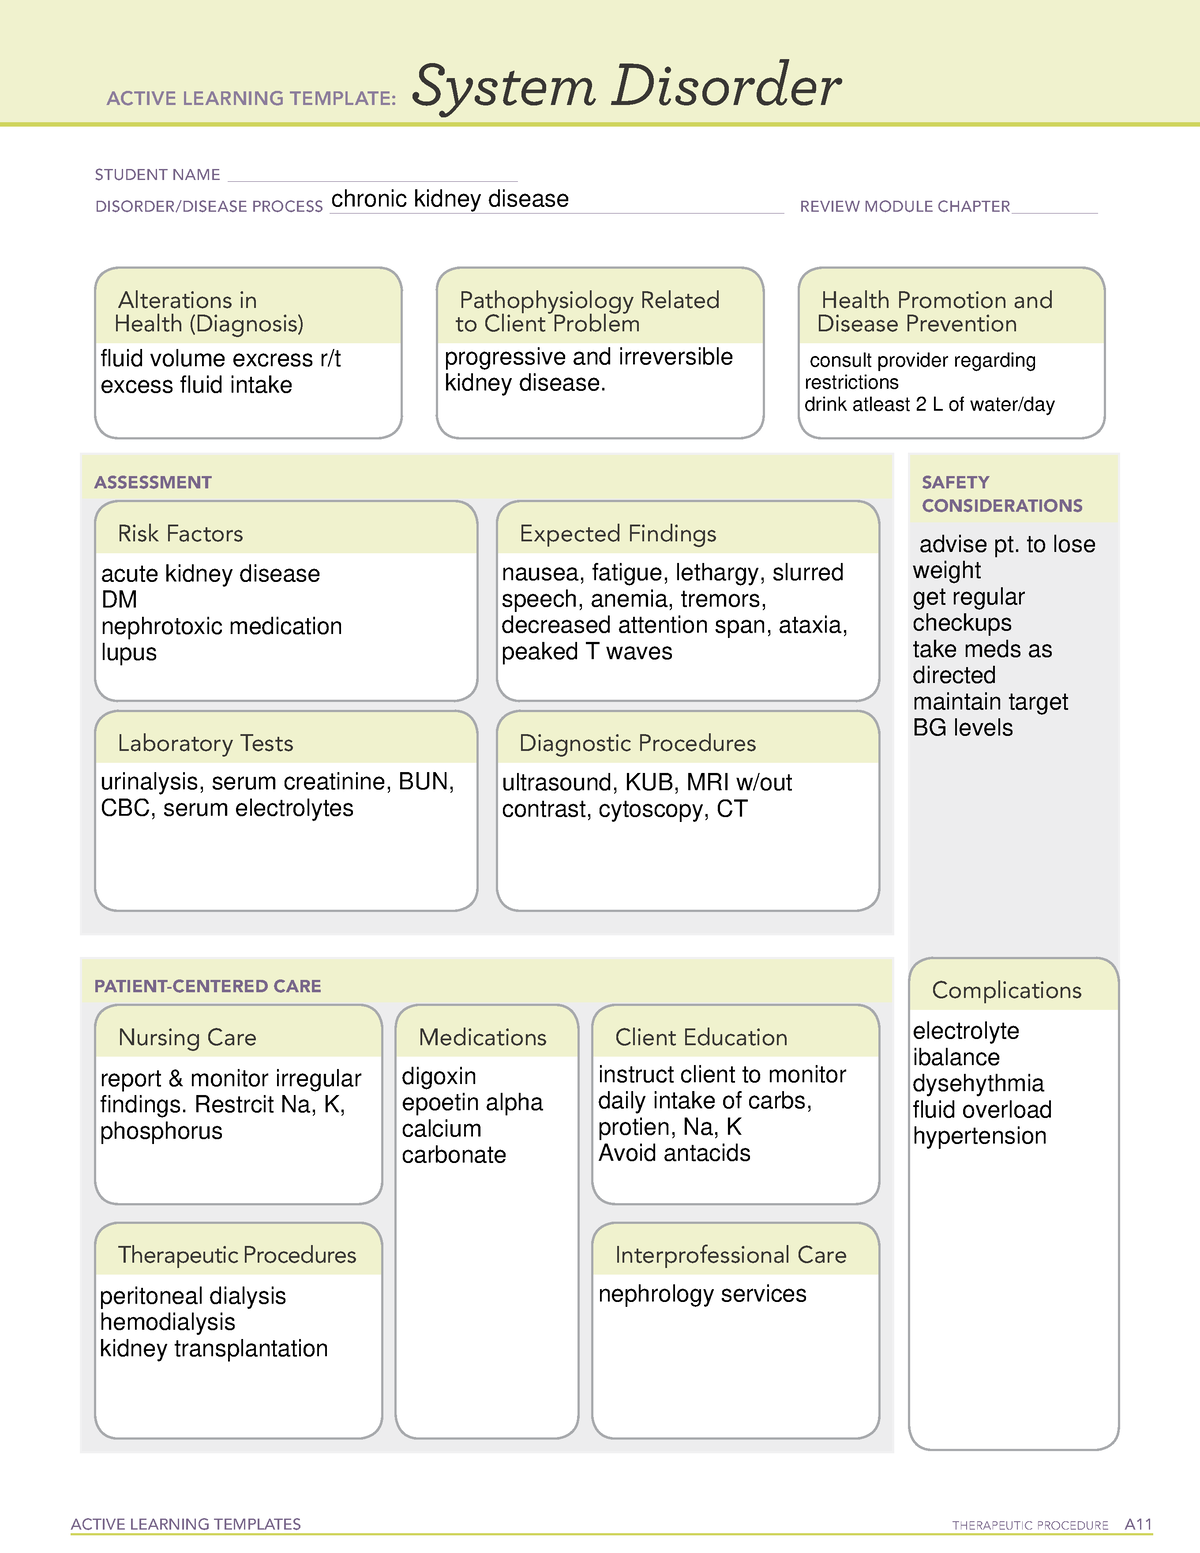 ckd-chronic-kidney-disease-active-learning-template-ati-active